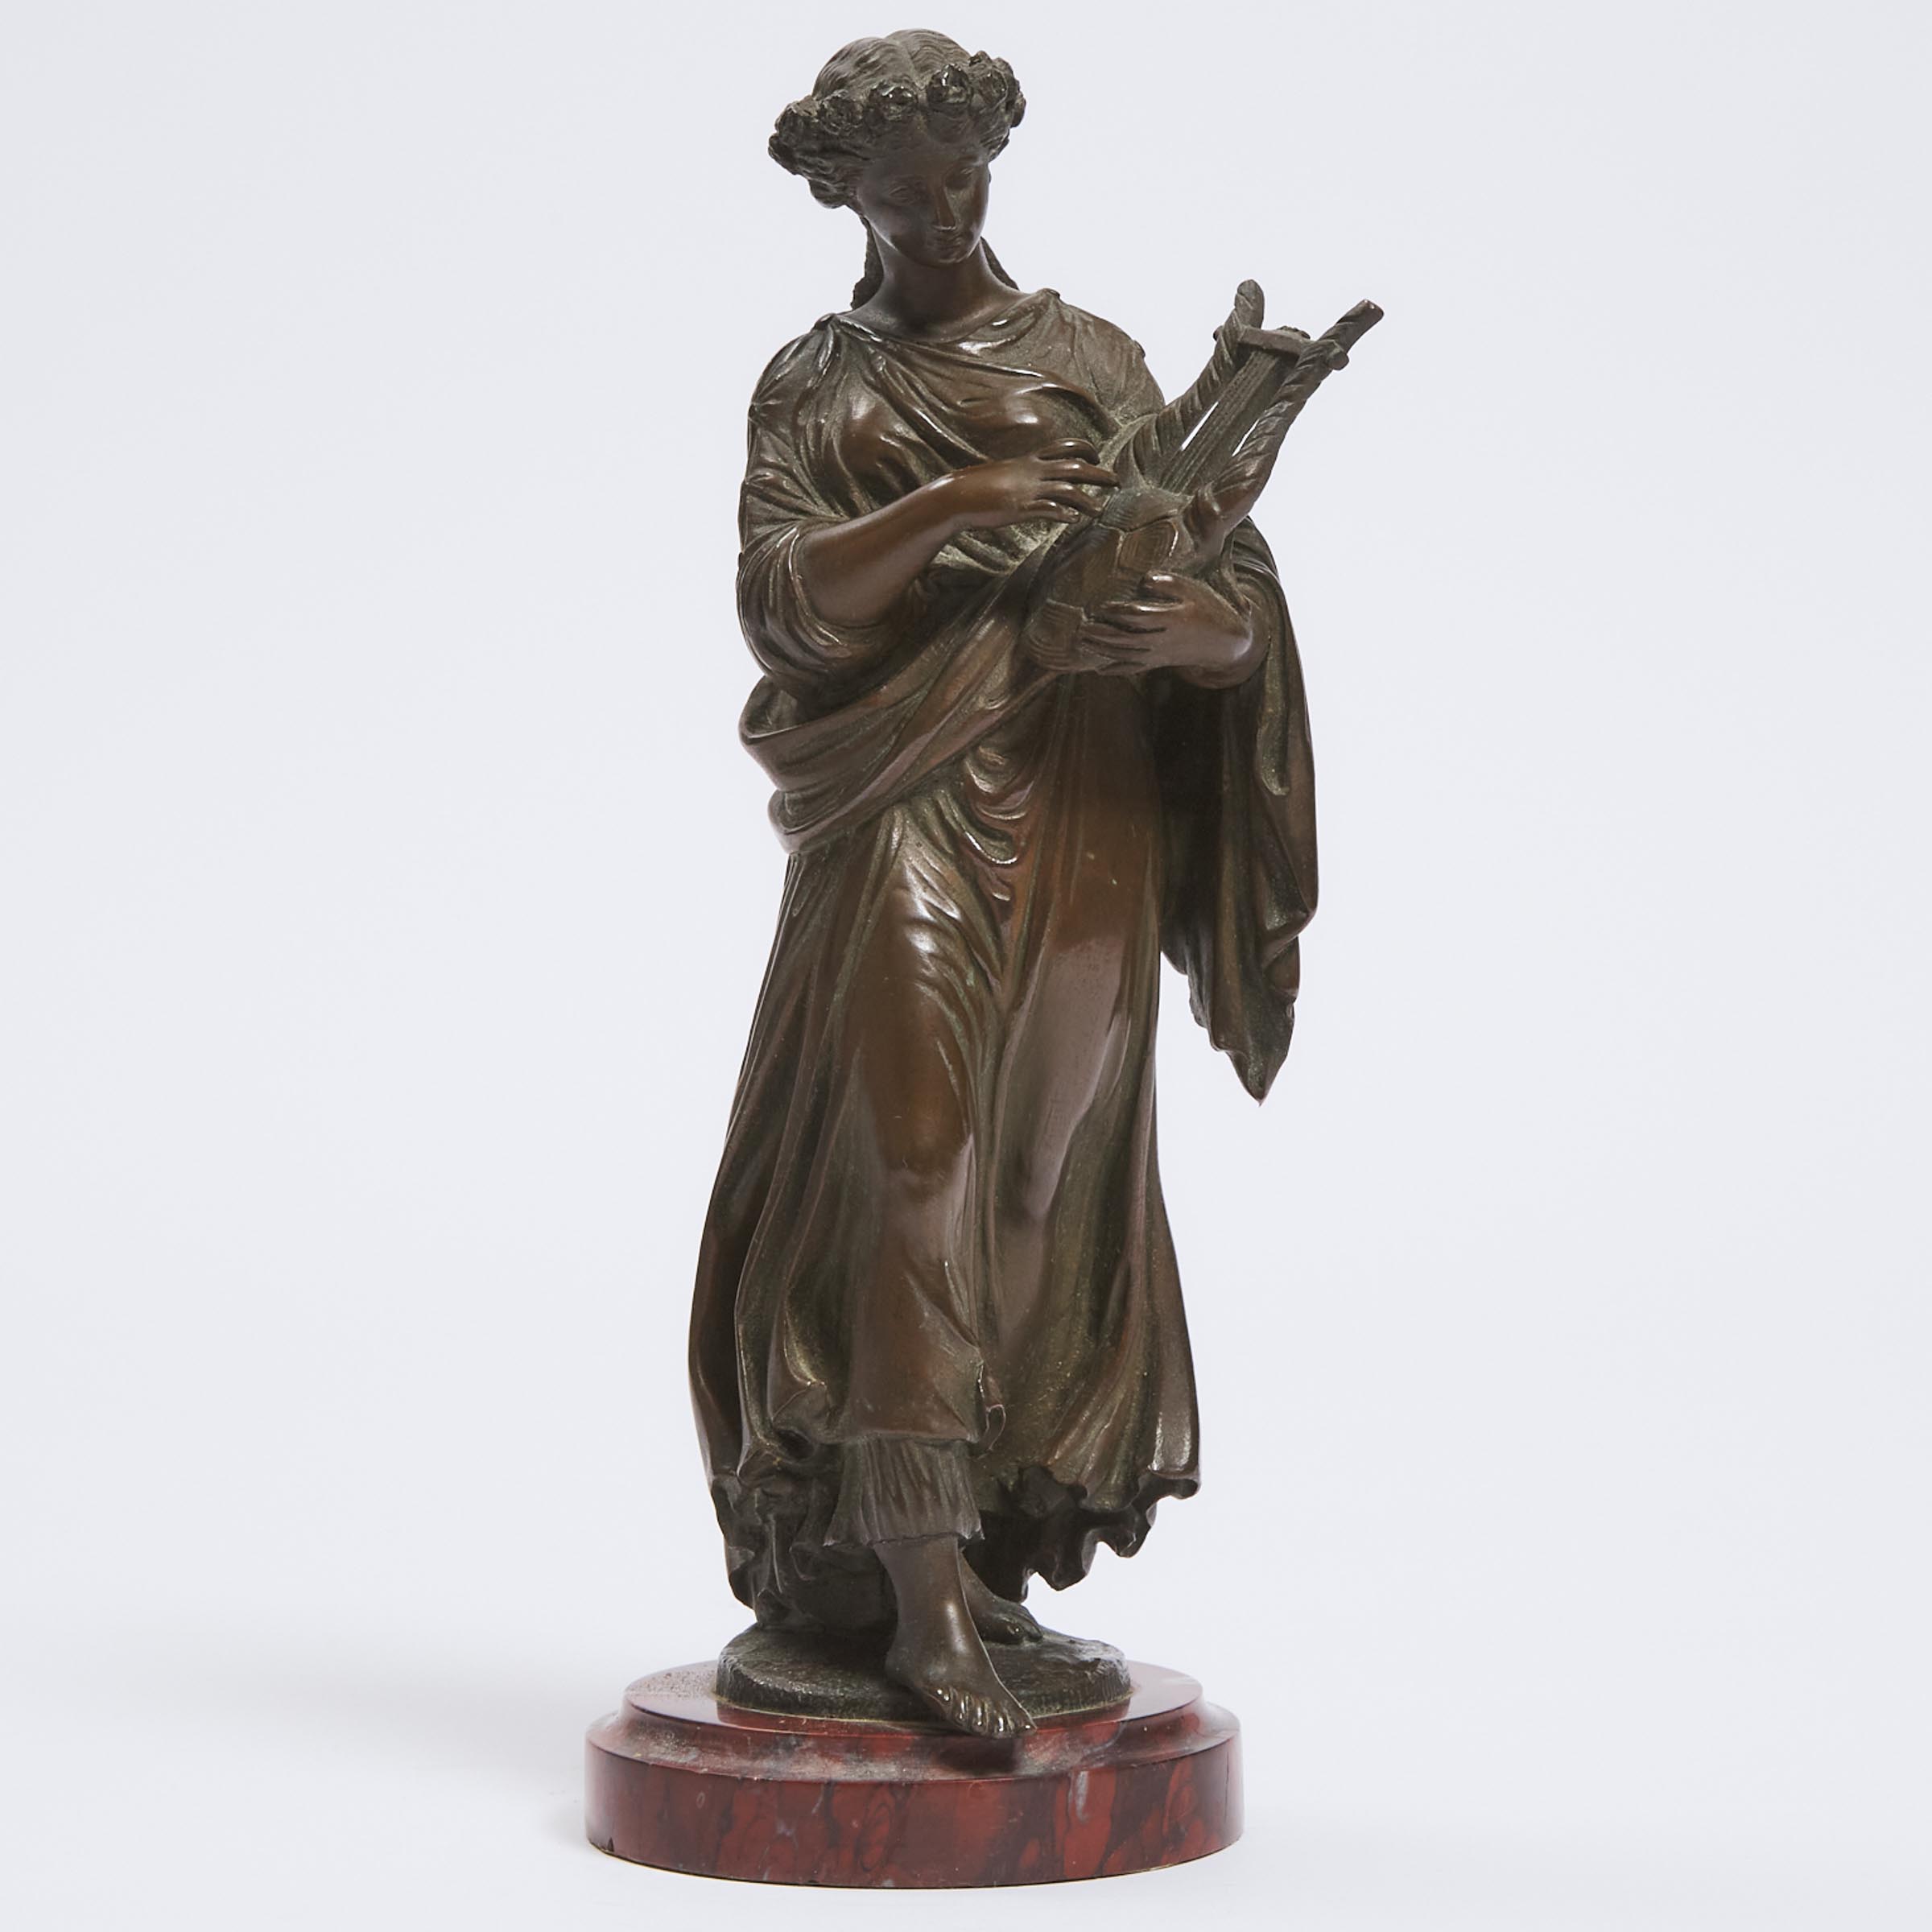 French School Patinated Bronze Figure of a Classical Musician, 19th century